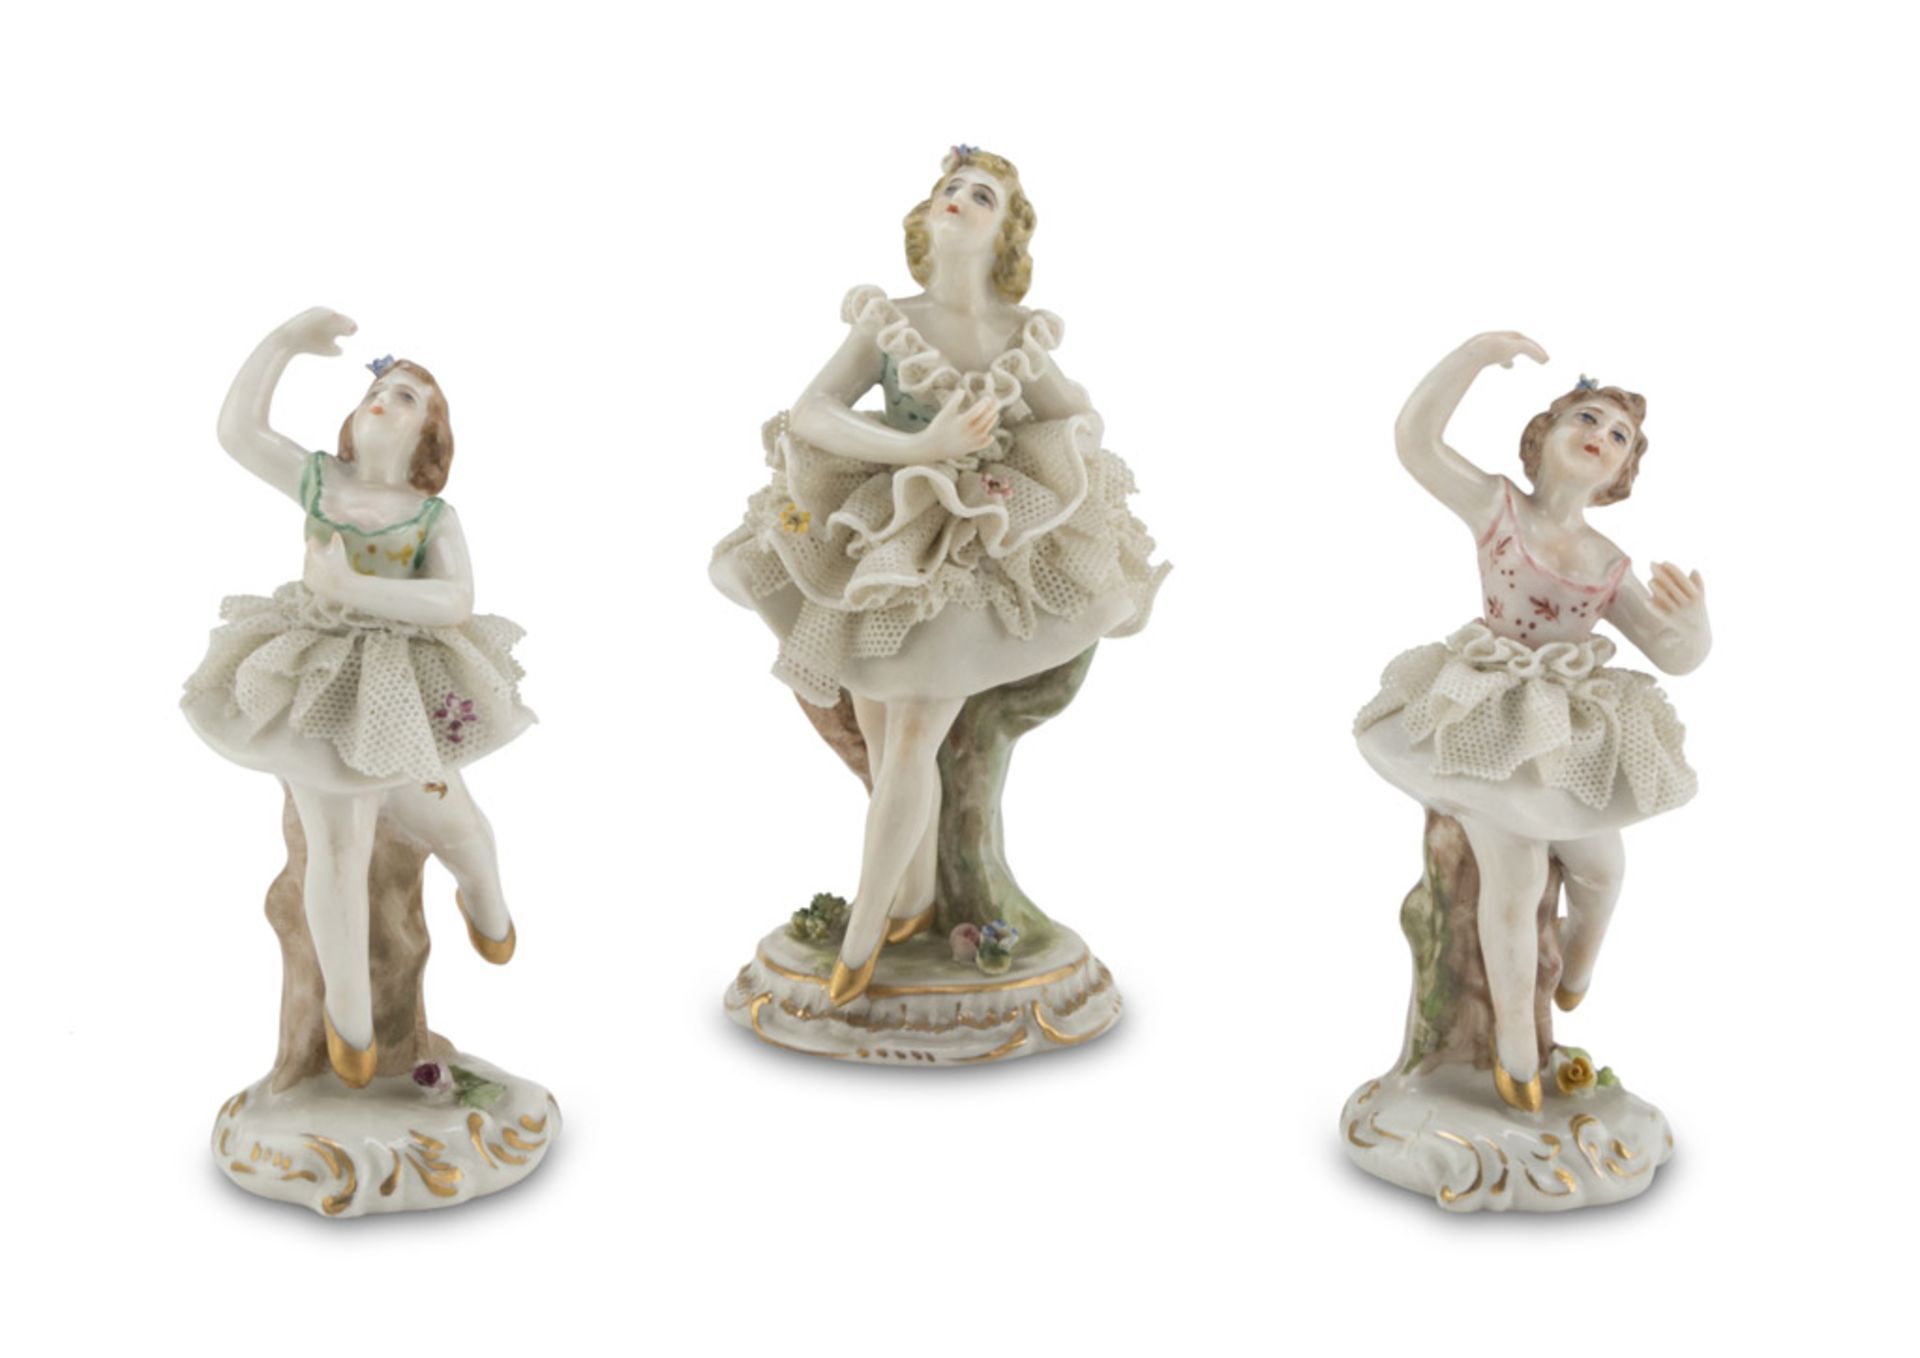 THREE BALLERINA FIGURES IN PORCELAIN, GINORI EARLY 20TH CENTURY in white enamel and polychromy.